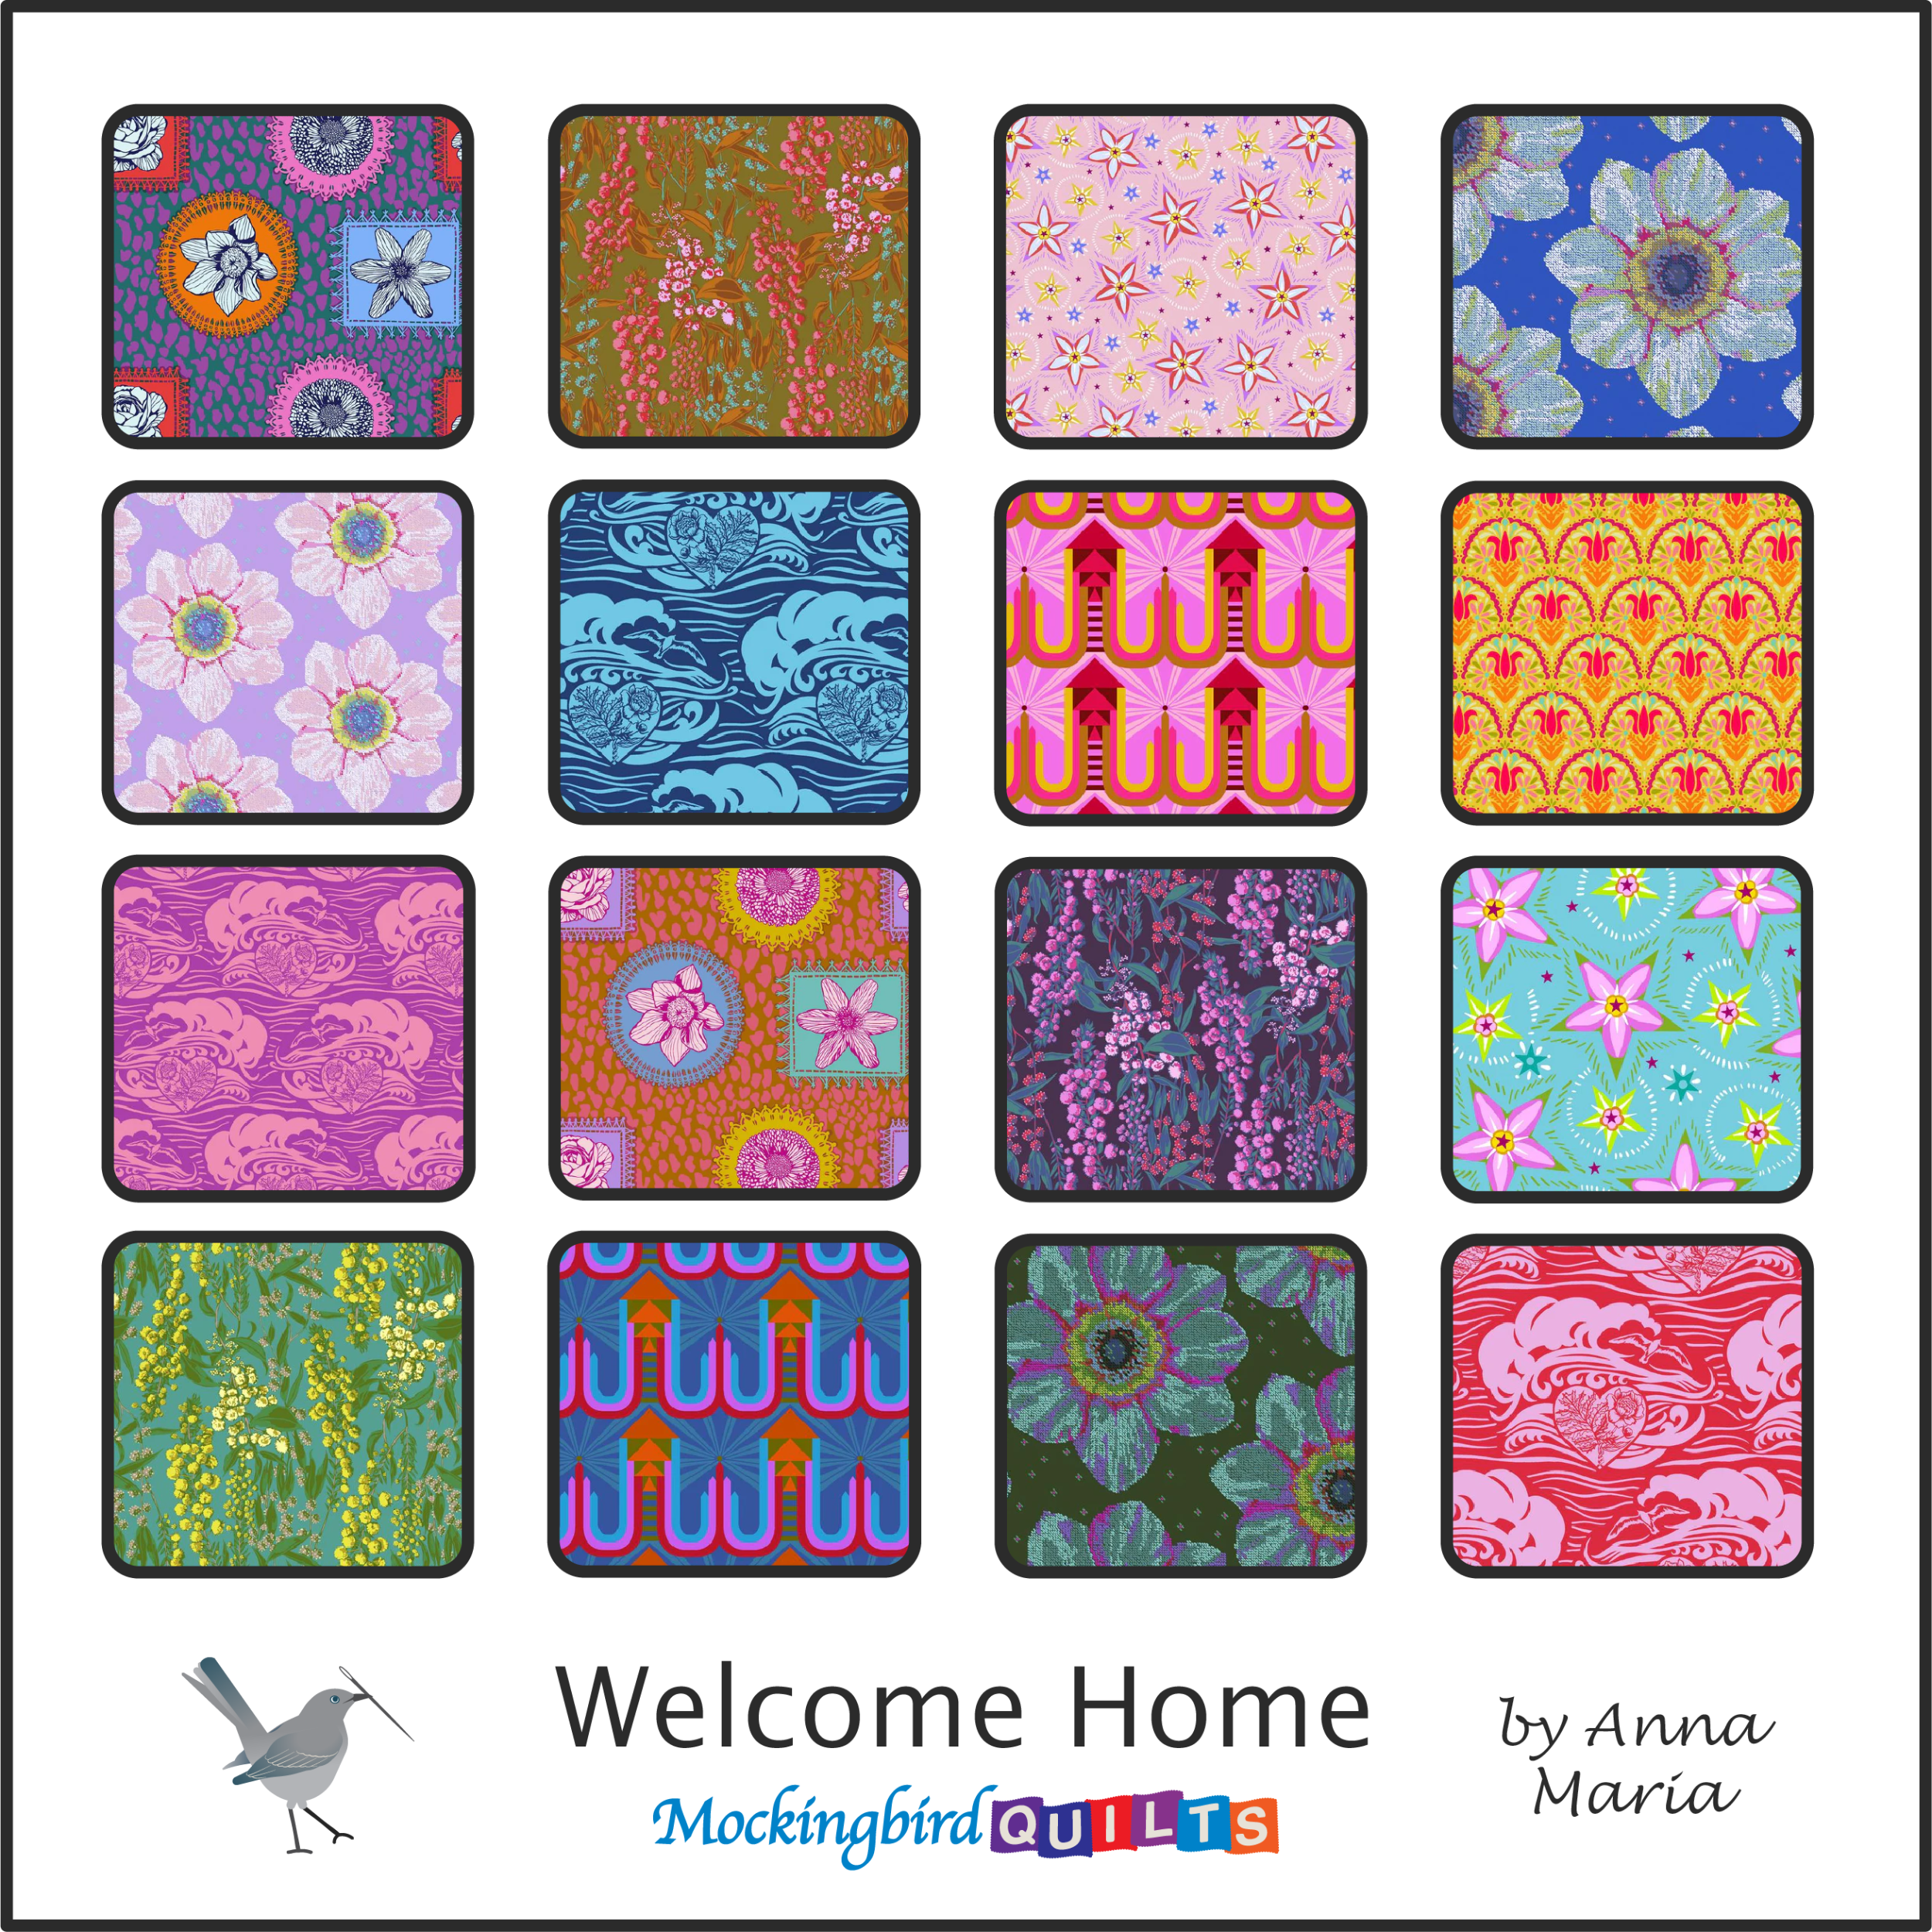 This image shows twenty-two fabric swatches in the collection “Welcome Home” by Anna Maria Horner. This fabric line is as colorful as the rainbow, featuring prints of flowers, paisley, graphic shapes, and upholstery-inspired textures.